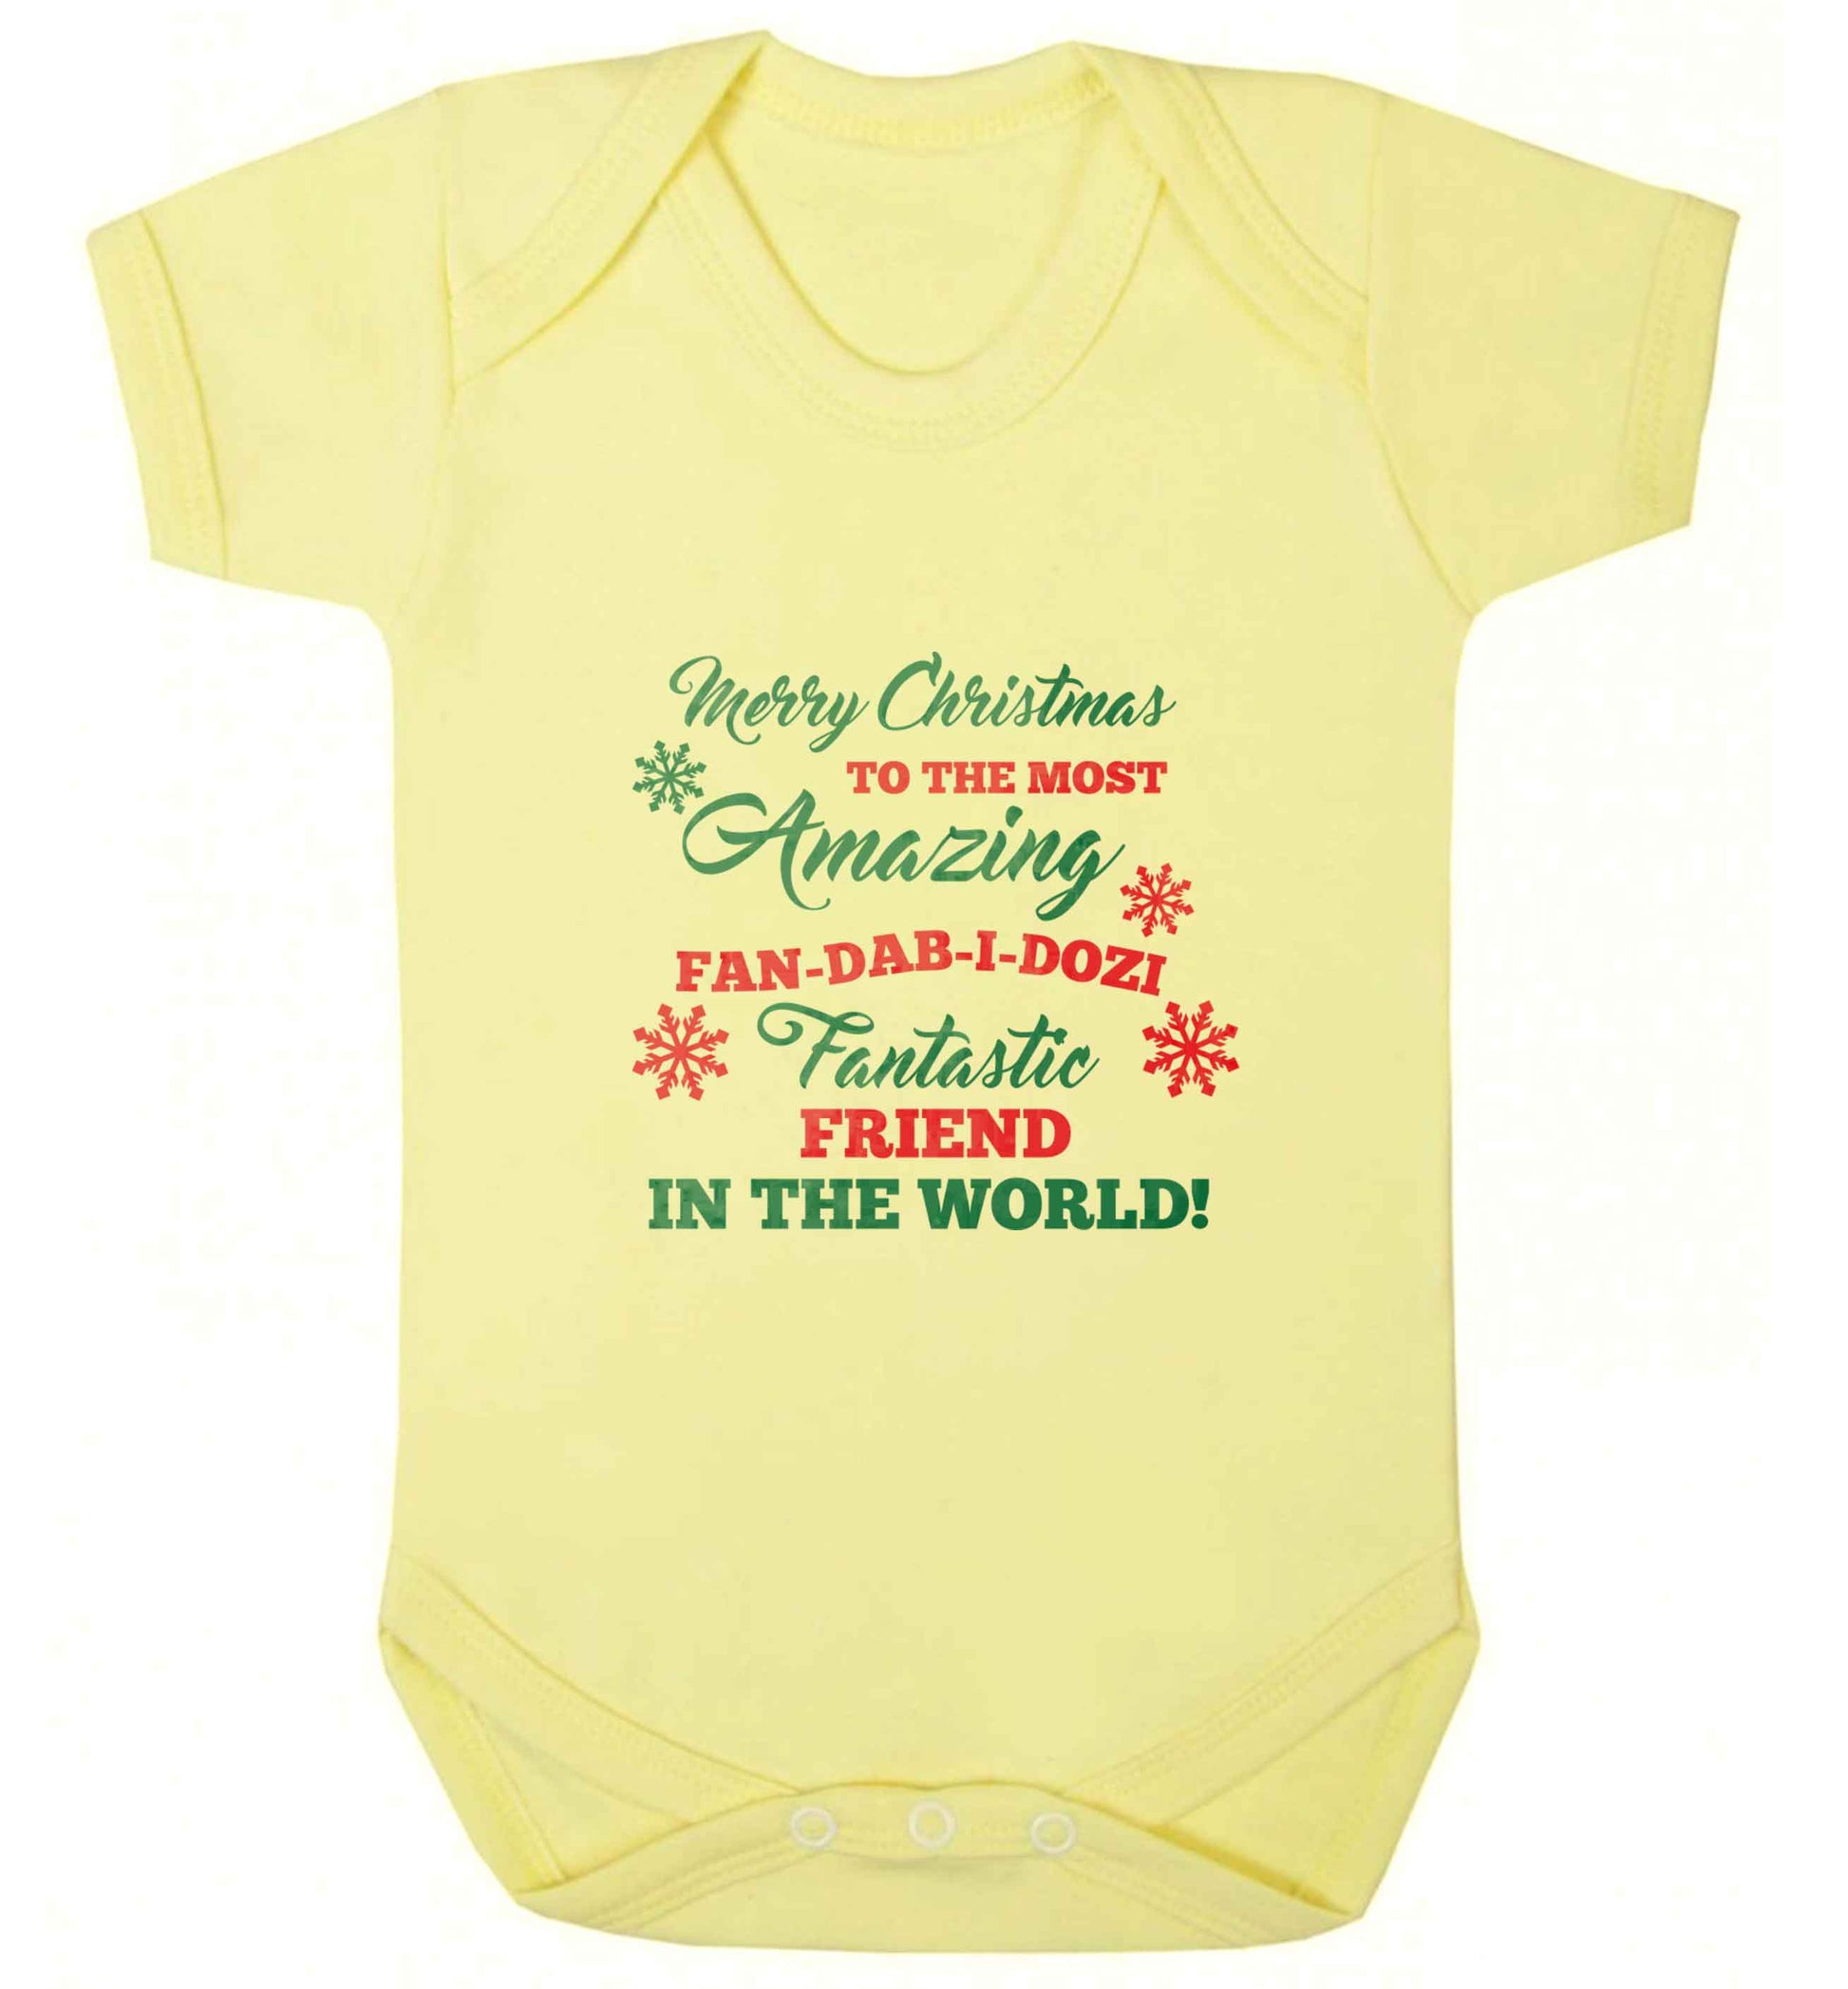 Merry Christmas to the most amazing fan-dab-i-dozi fantasic friend in the world baby vest pale yellow 18-24 months